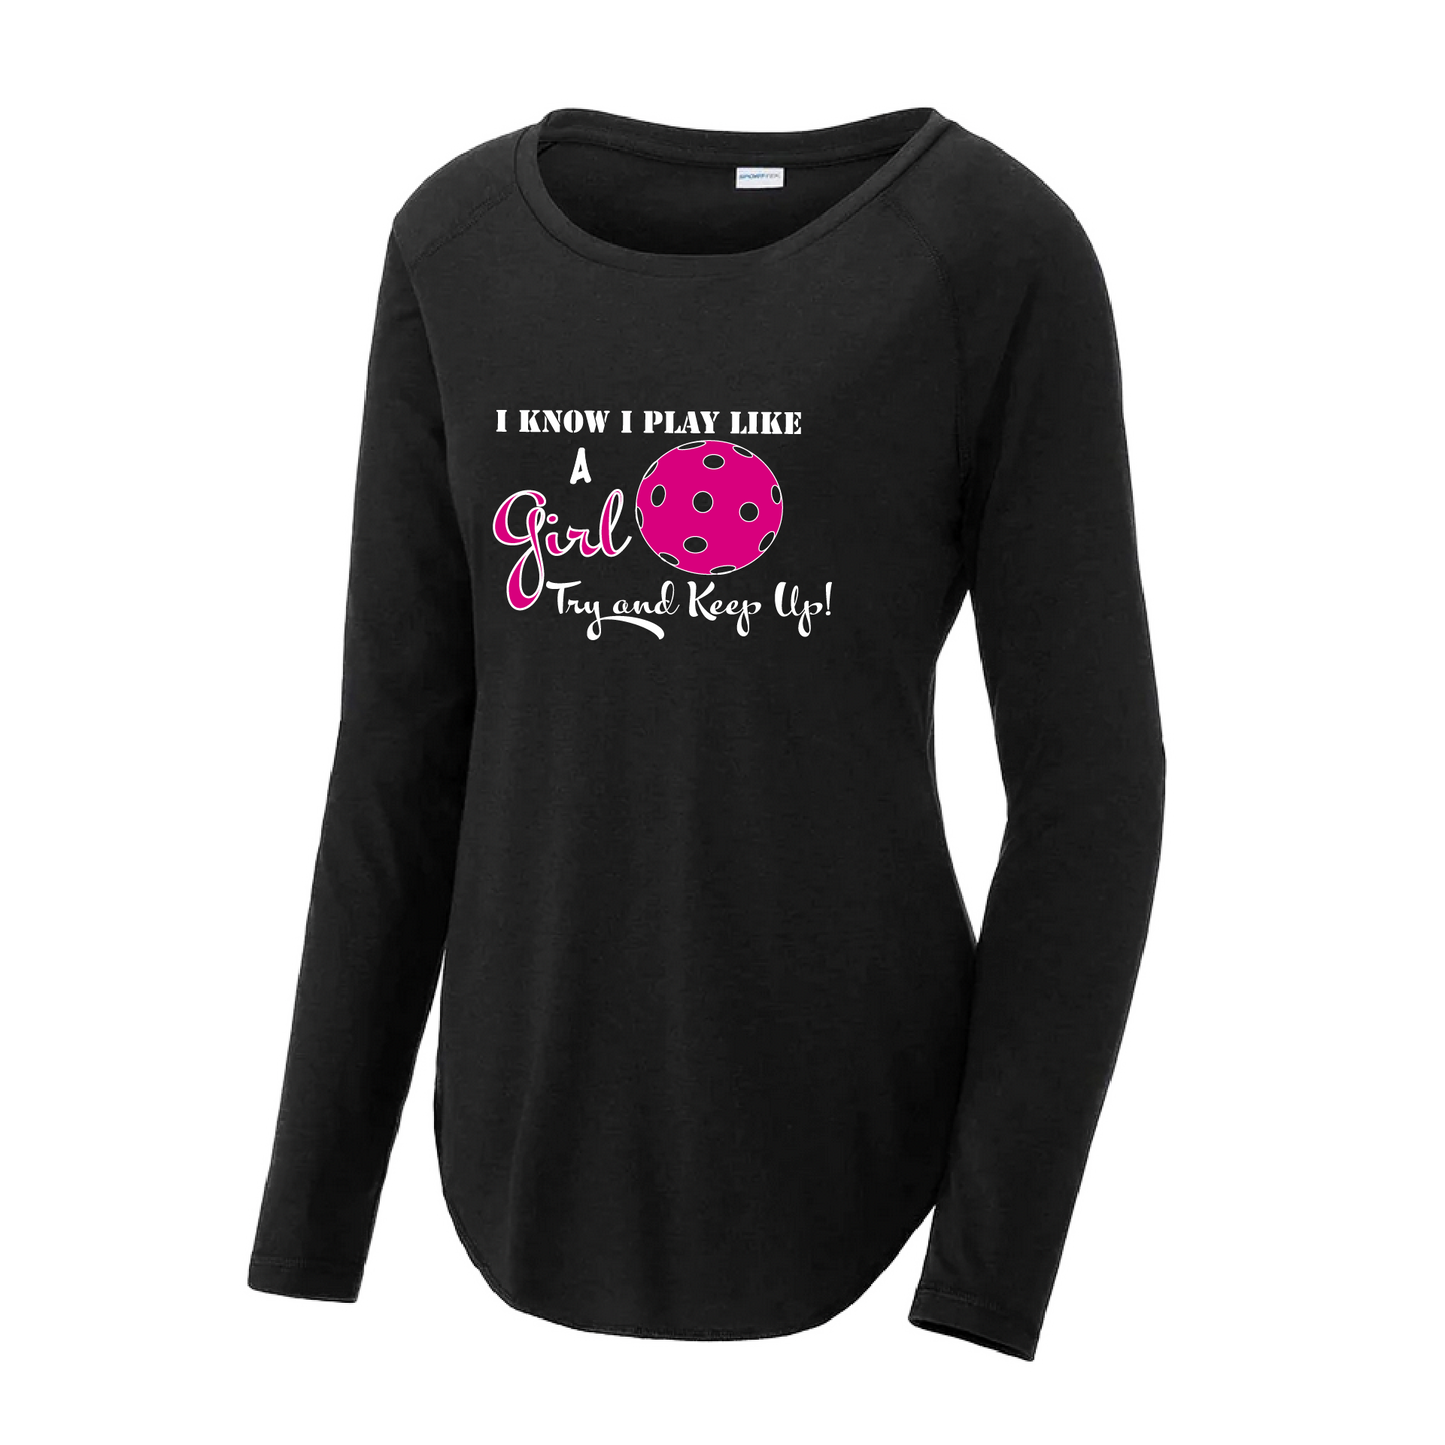 Pickleball Design: I know I Play Like a Girl, Try to Keep Up  Women's Style: Long Sleeve Scoop-Neck  Turn up the volume in this Women's shirt with its perfect mix of softness and attitude. Material is ultra-comfortable with moisture wicking properties and tri-blend softness. PosiCharge technology locks in color. Highly breathable and lightweight.